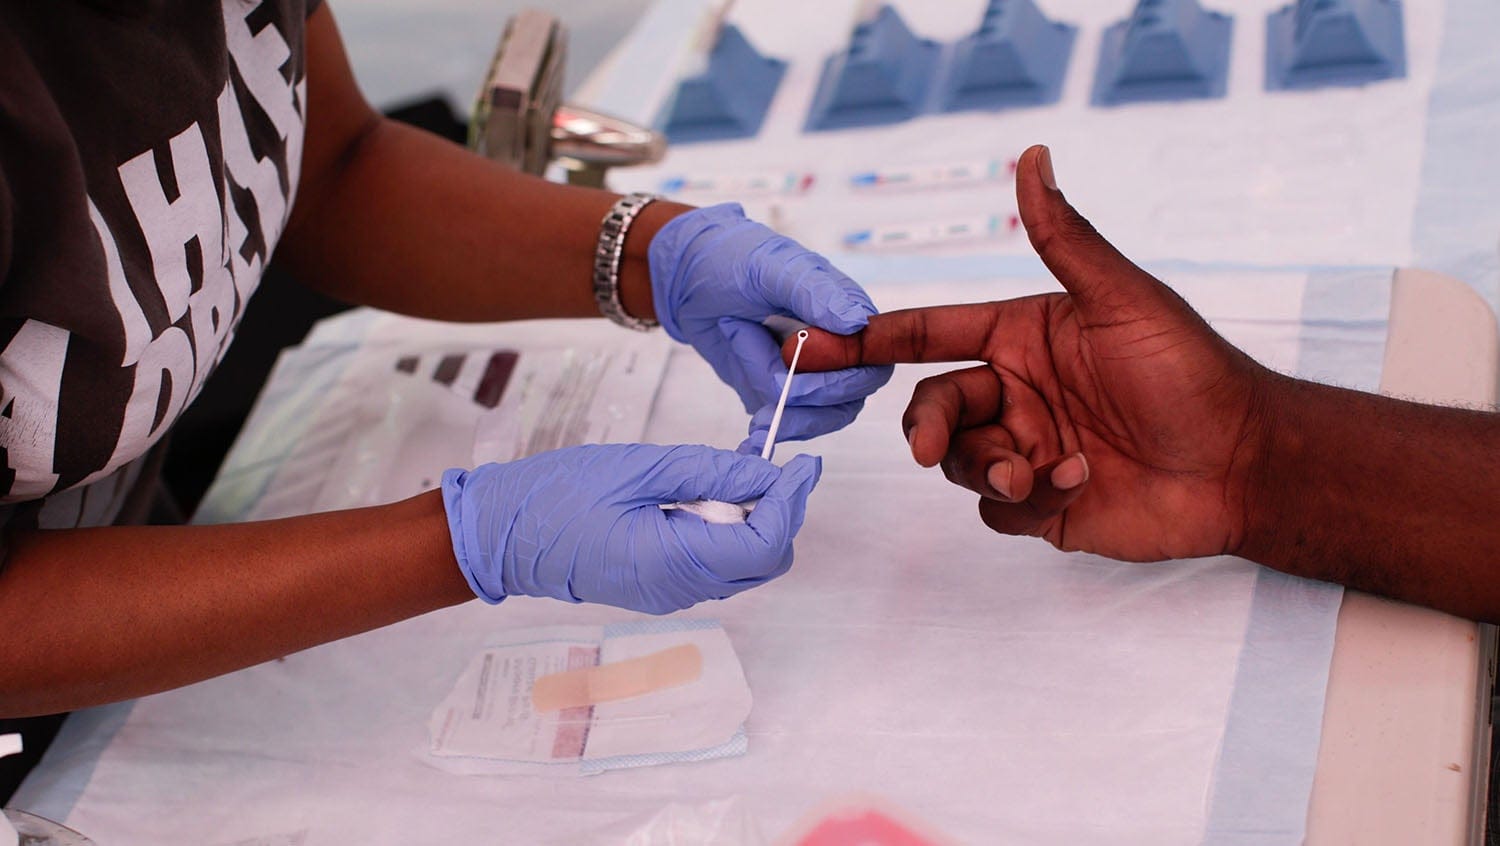 hiv rapid test in covid-19 pandemic